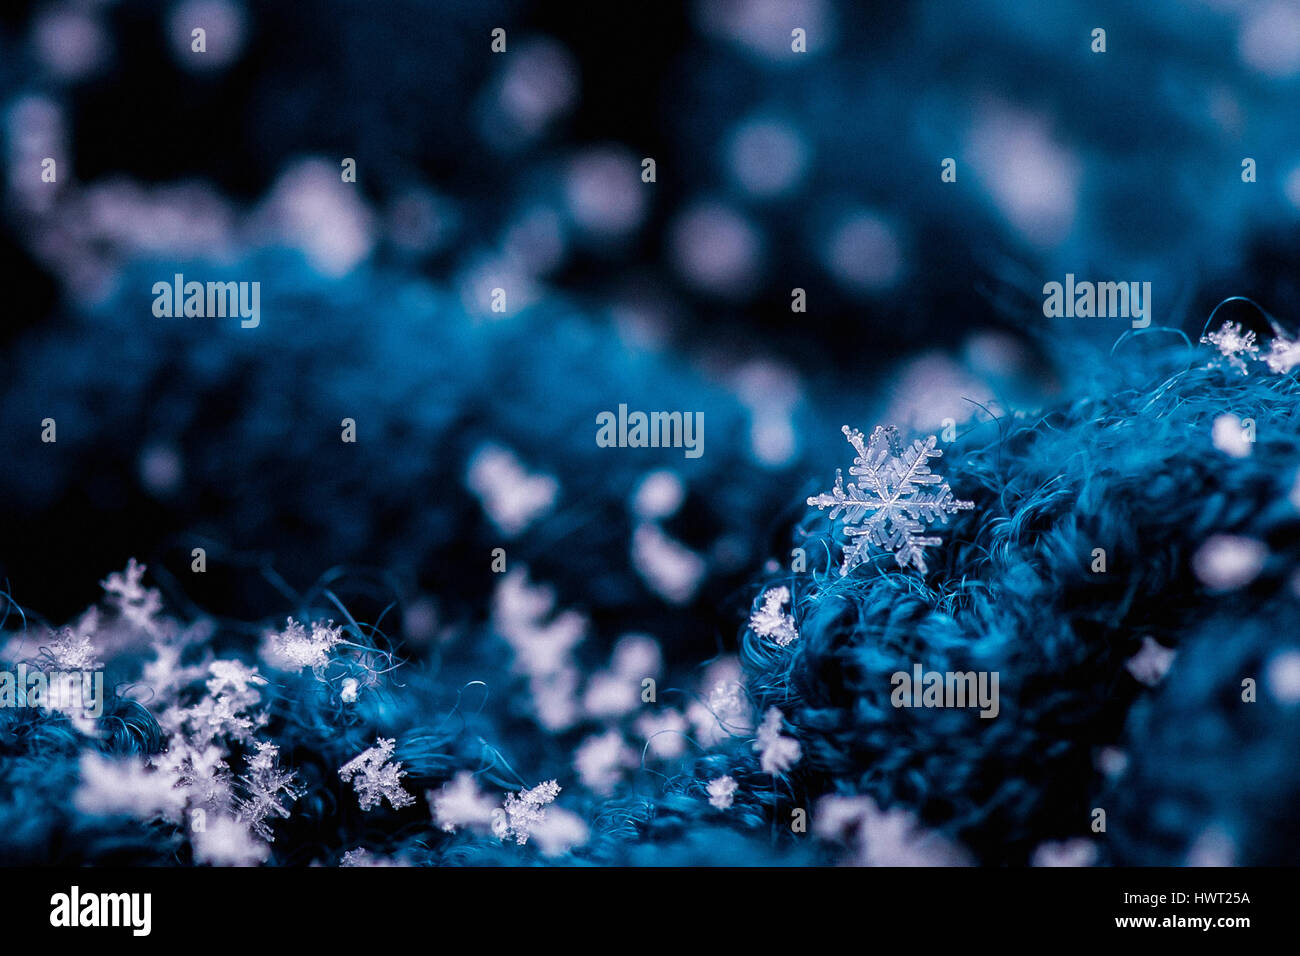 Close-up of snowflakes on plants Stock Photo